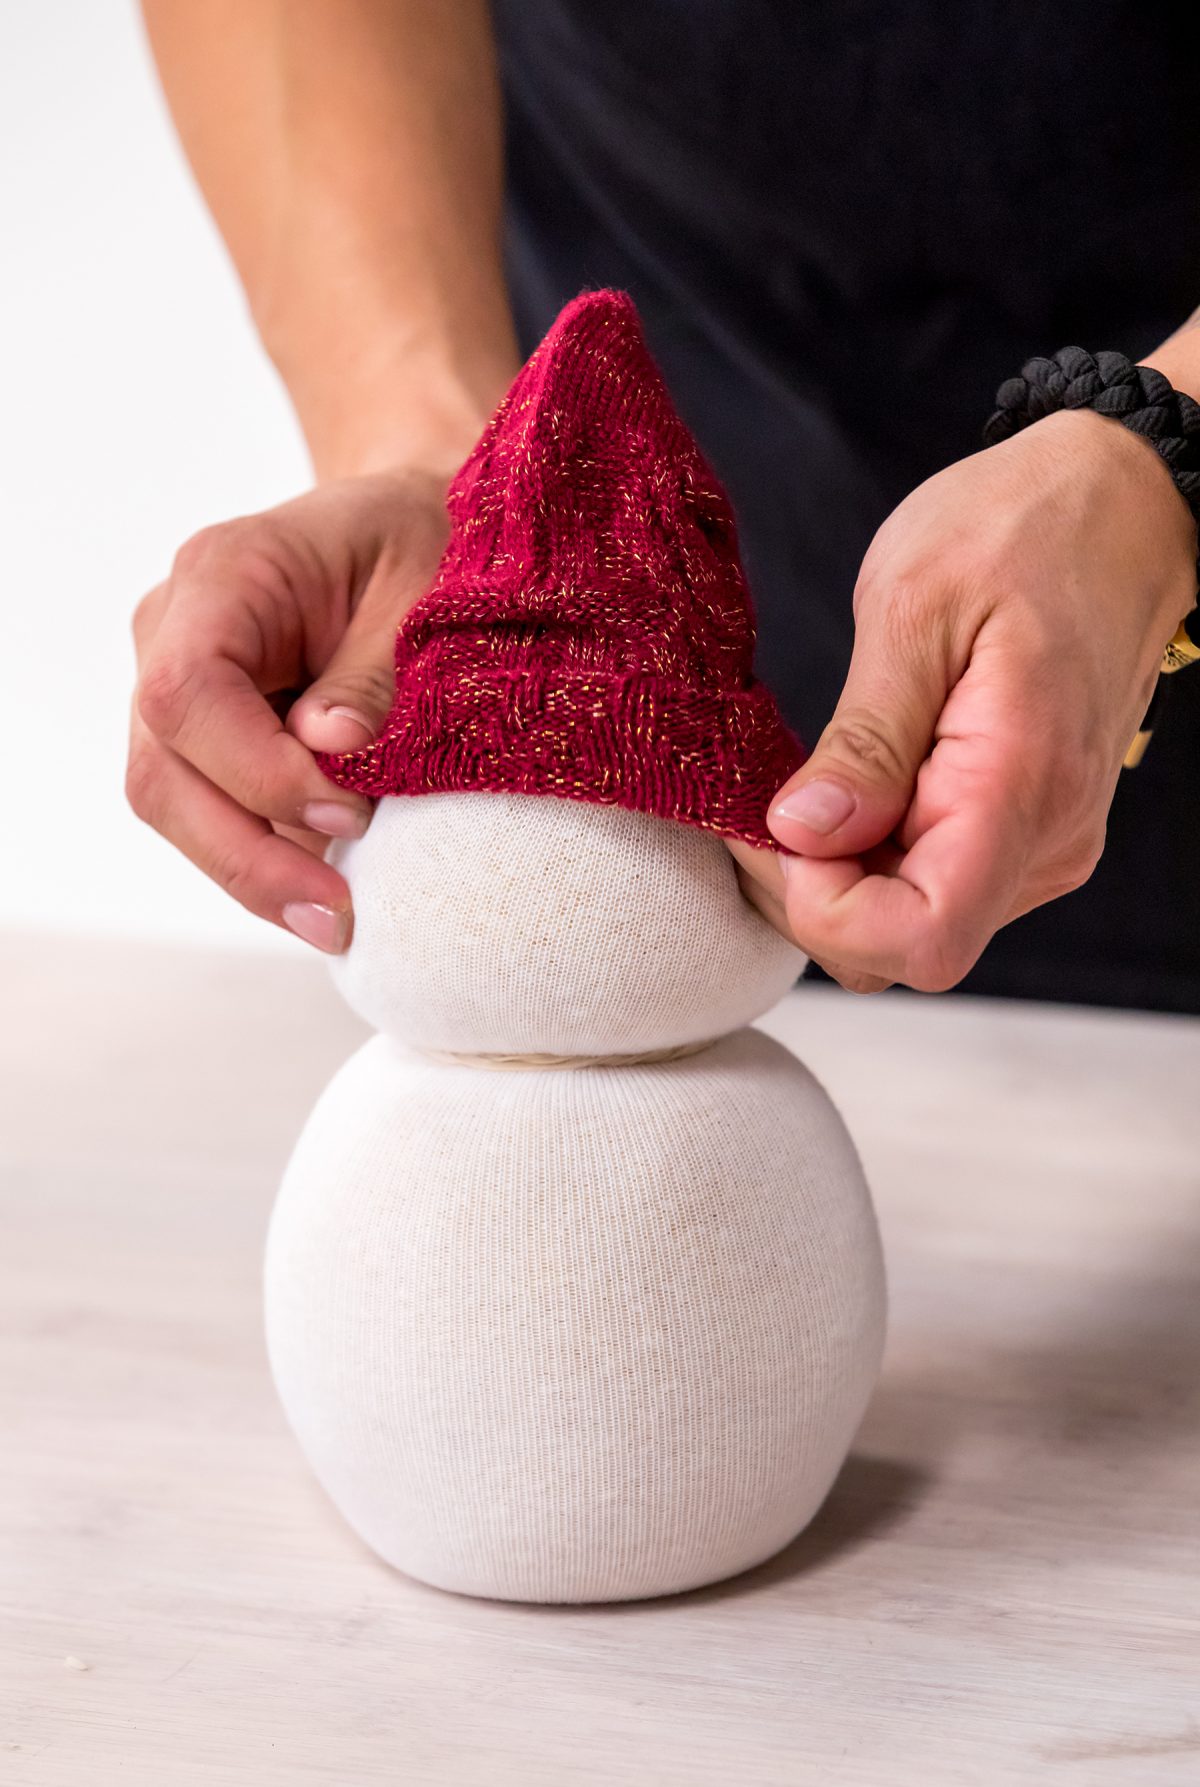 hat for tube sock snowman craft